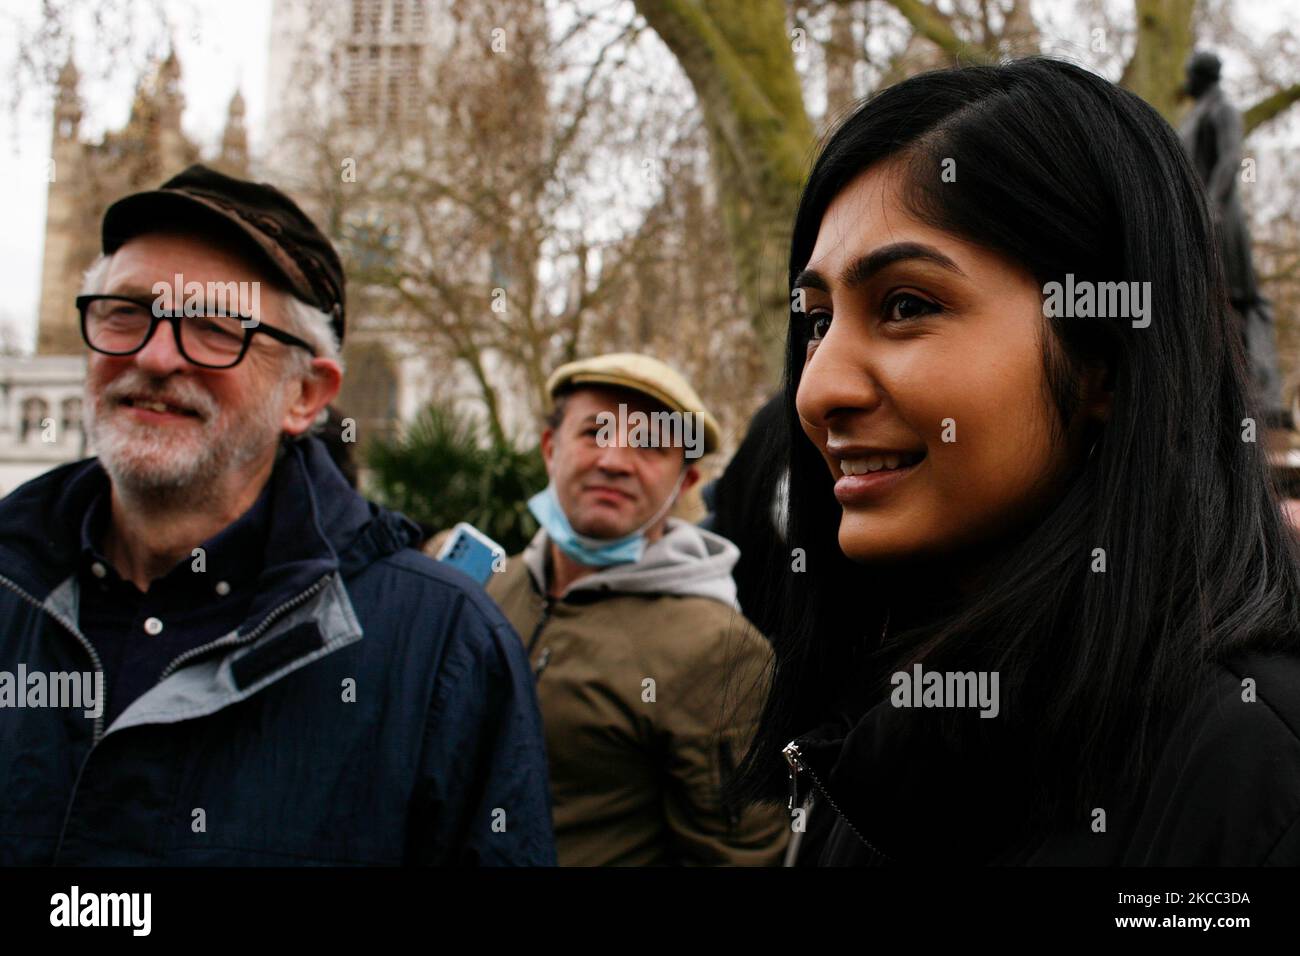 Zarah Sultana (R), Labour Party MP for Coventry South, stands with former Labour Party leader Jeremy Corbyn (L), MP for Islington North, as they prepare to address activists demonstrating against proposed new police powers set out in the government's Police, Crime, Sentencing and Courts Bill at a 'Kill the Bill' protest in Parliament Square London, England, on April 3, 2021. The bill, which is currently at the 'committee stage' of its passage through the House of Commons, would allow police to impose more conditions on static protests in England and Wales, including fixed start and finish time Stock Photo